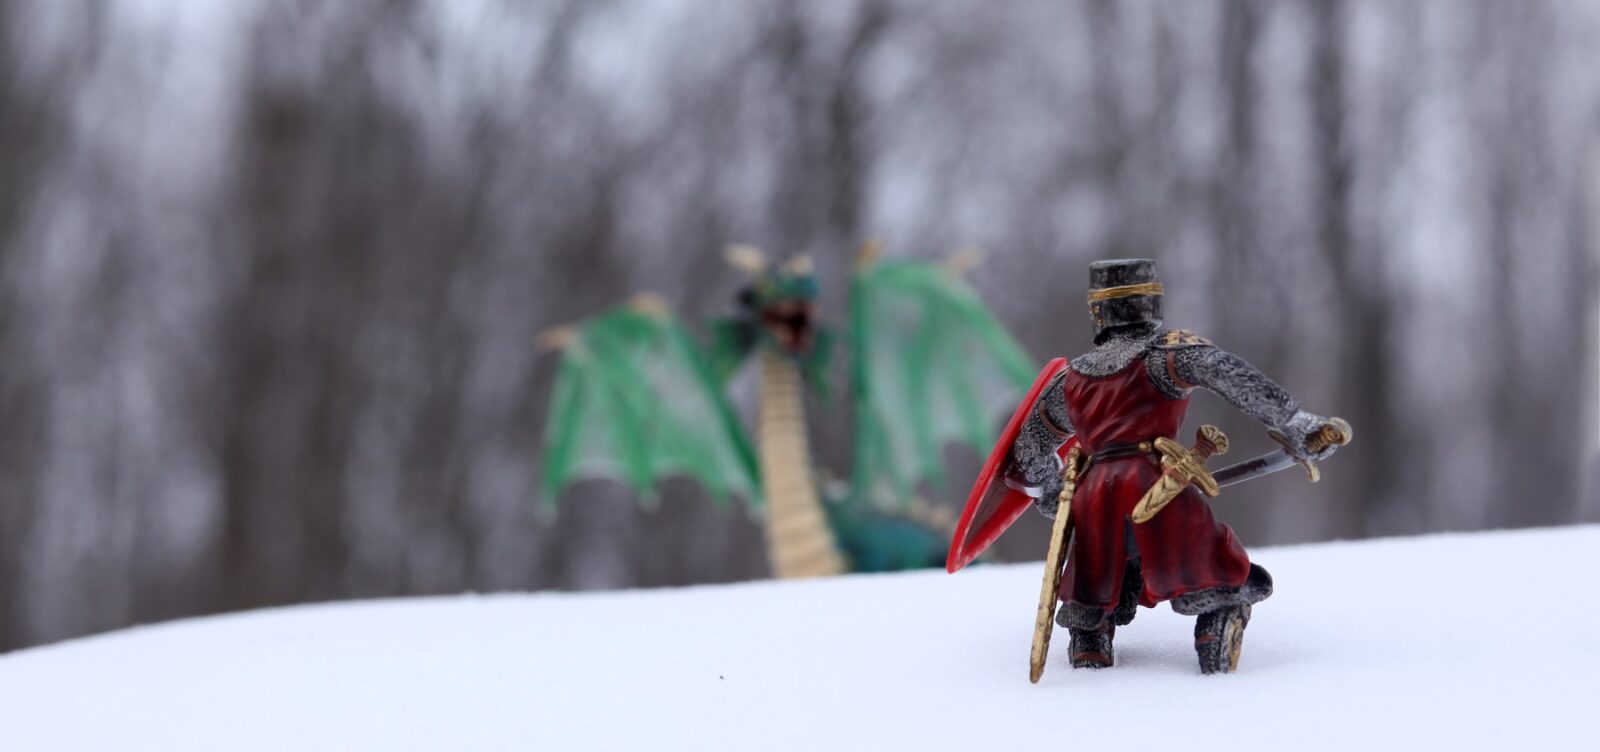 knight facing dragon in the snow | firewall rules